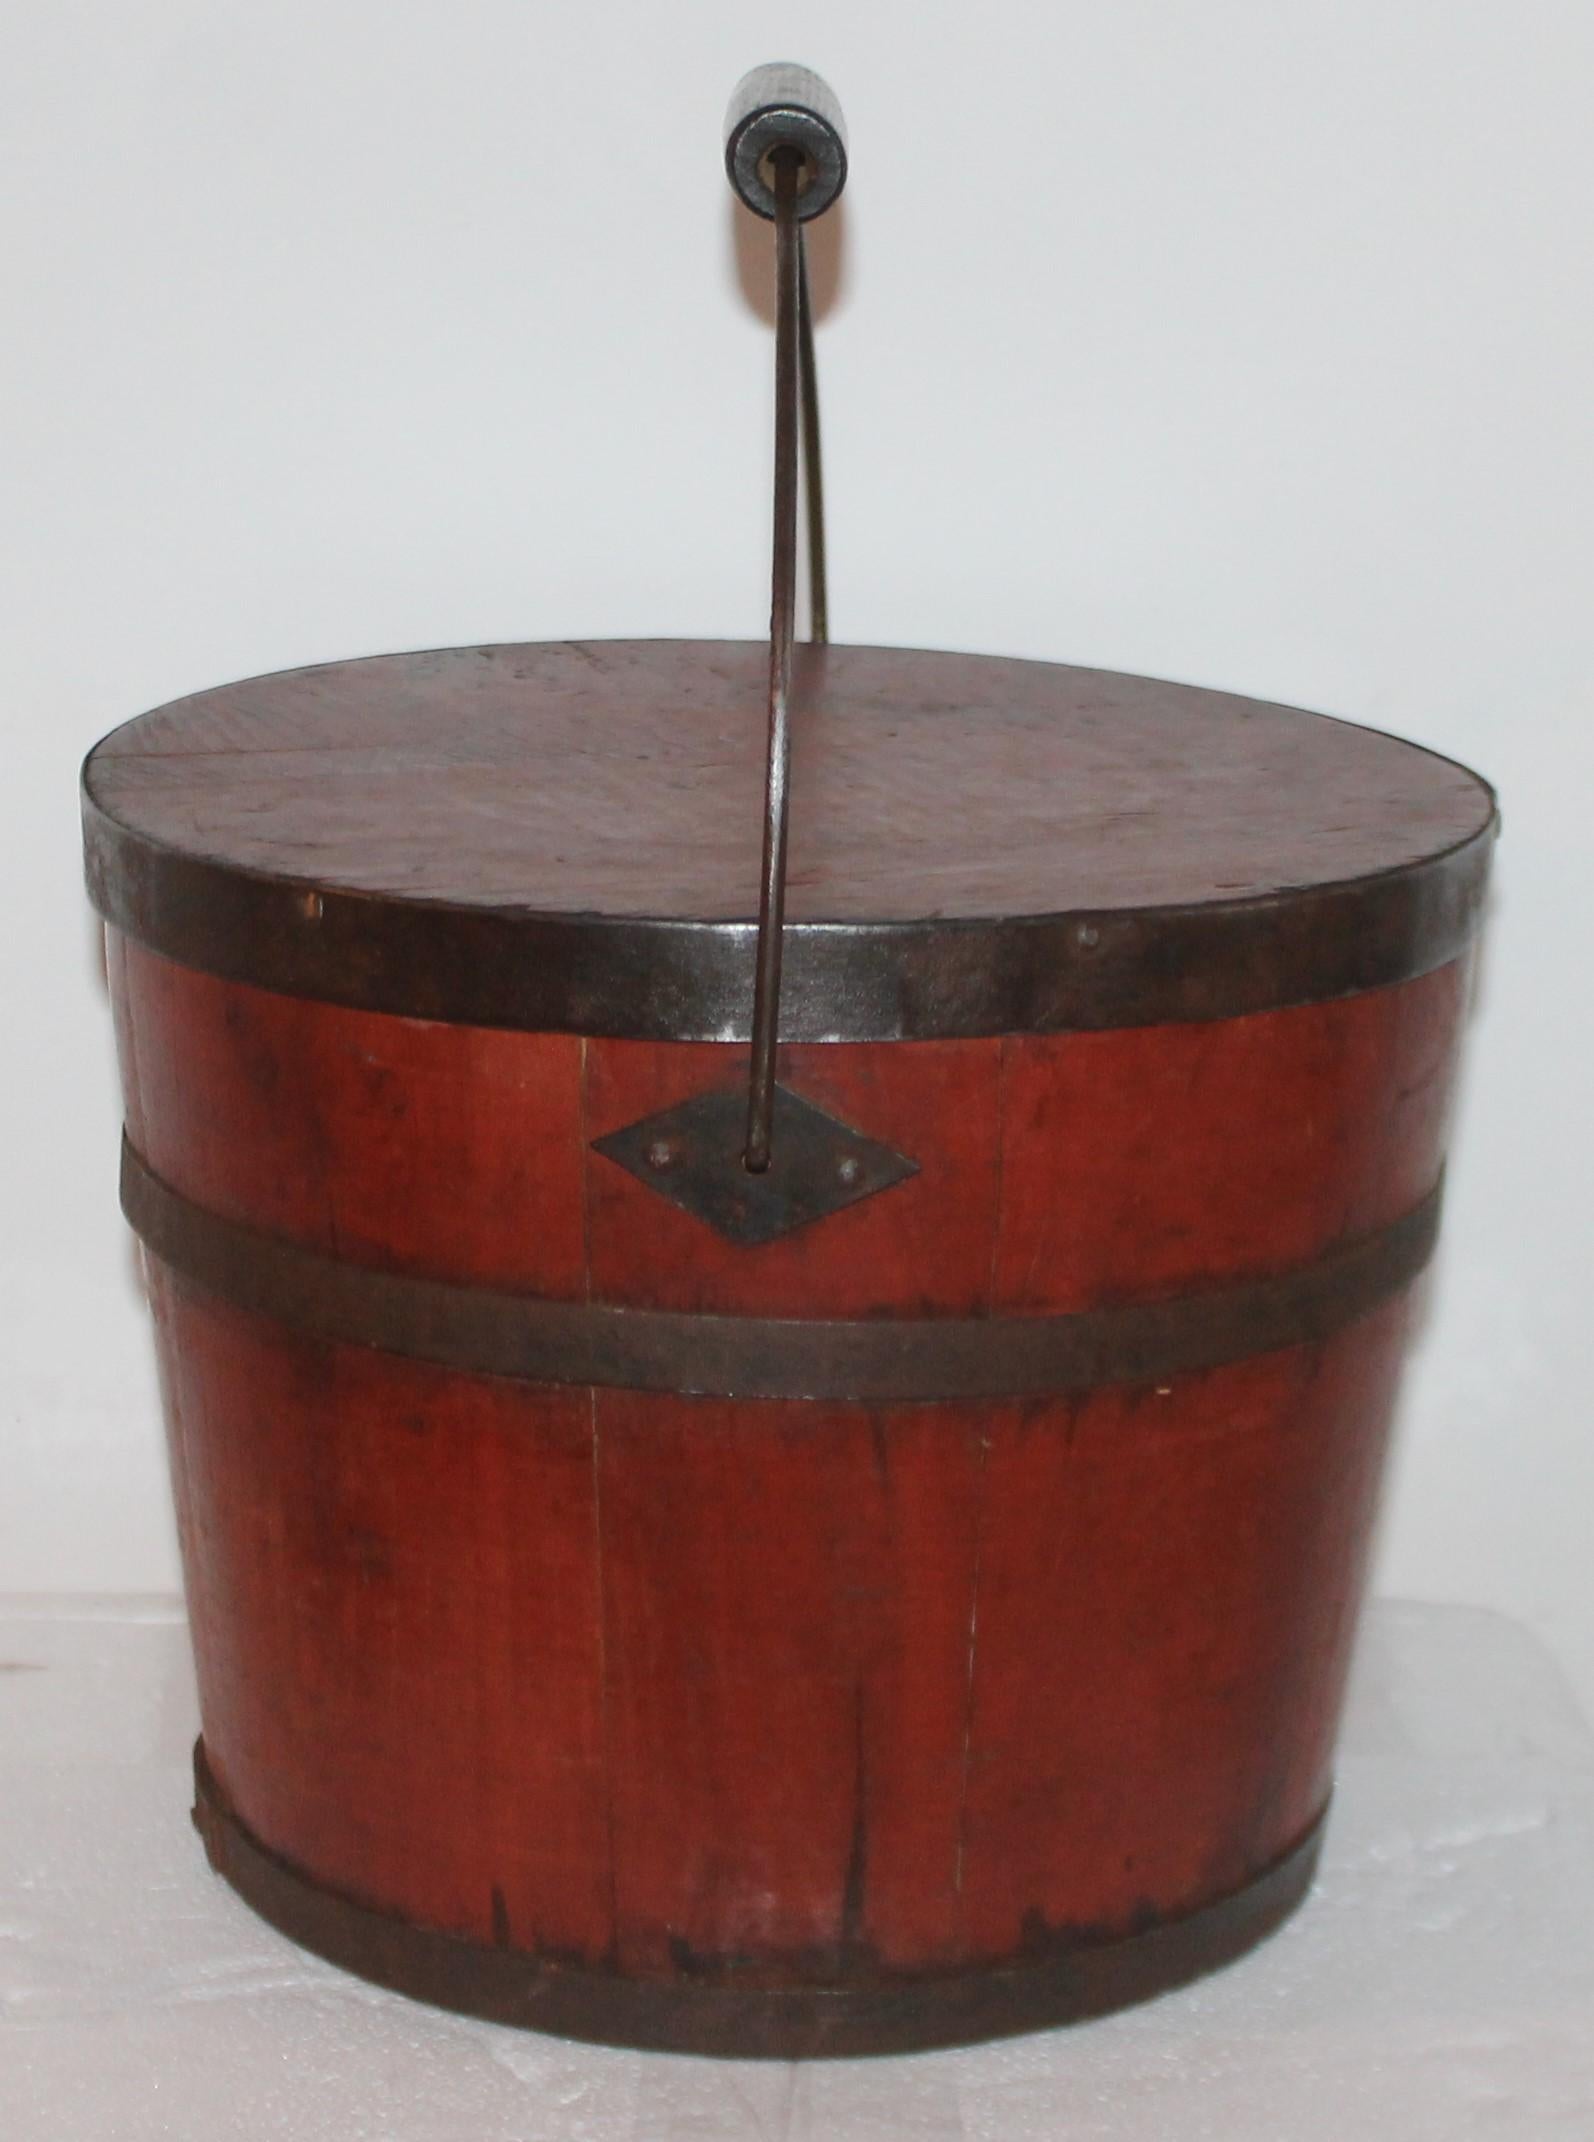 This fantastic 19Th century shaker bucket with original lid with red painted stain surface. This Fine little gem is in great as found condition. Very strong in sturdy condition. It is signed: N.F.SHAKERS -ENFIELD, N.H. on the base.